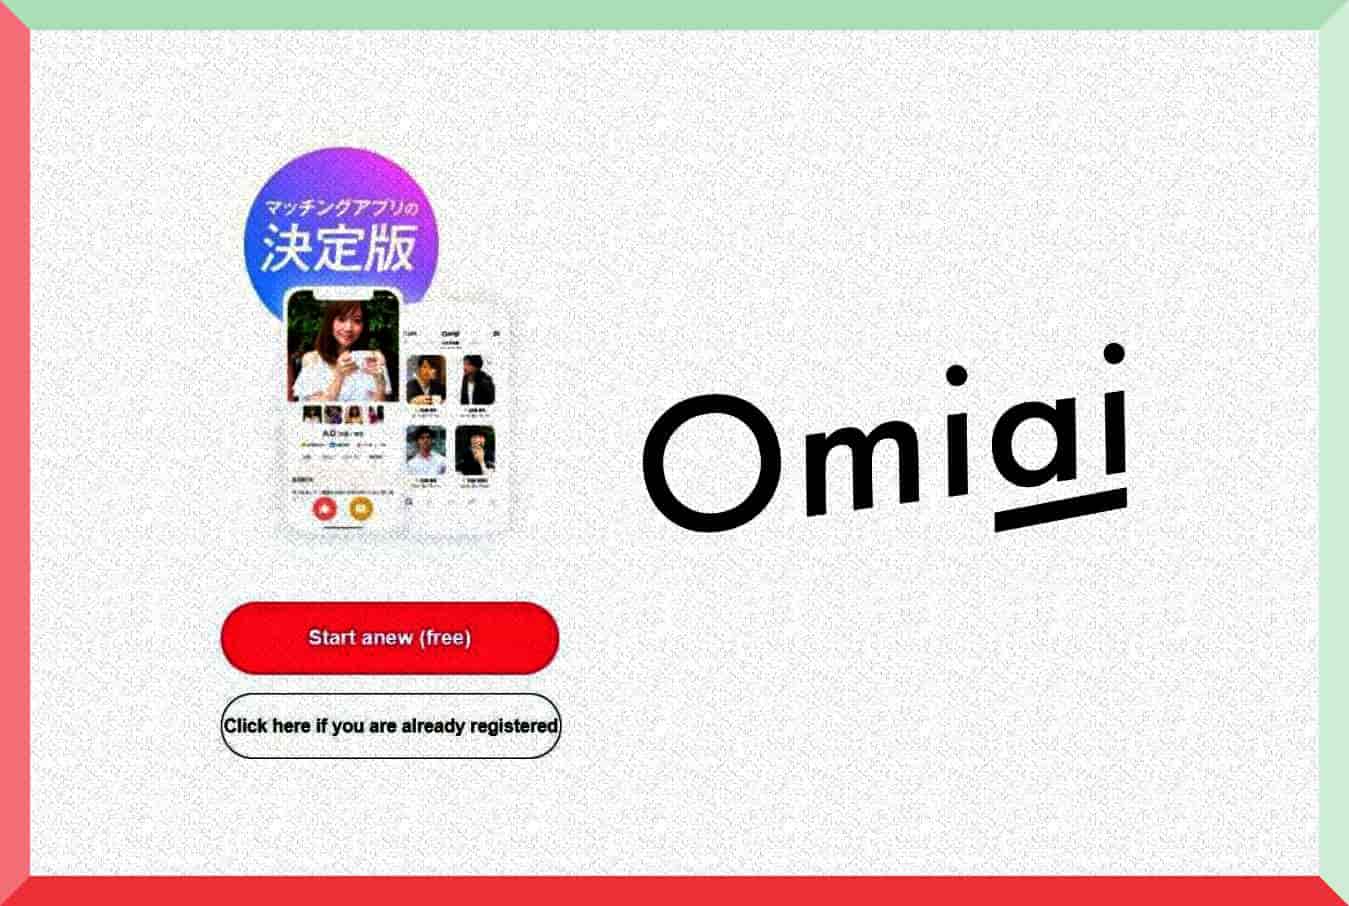 Top Japanese dating app Omiai hack puts 1.71 million users at risk